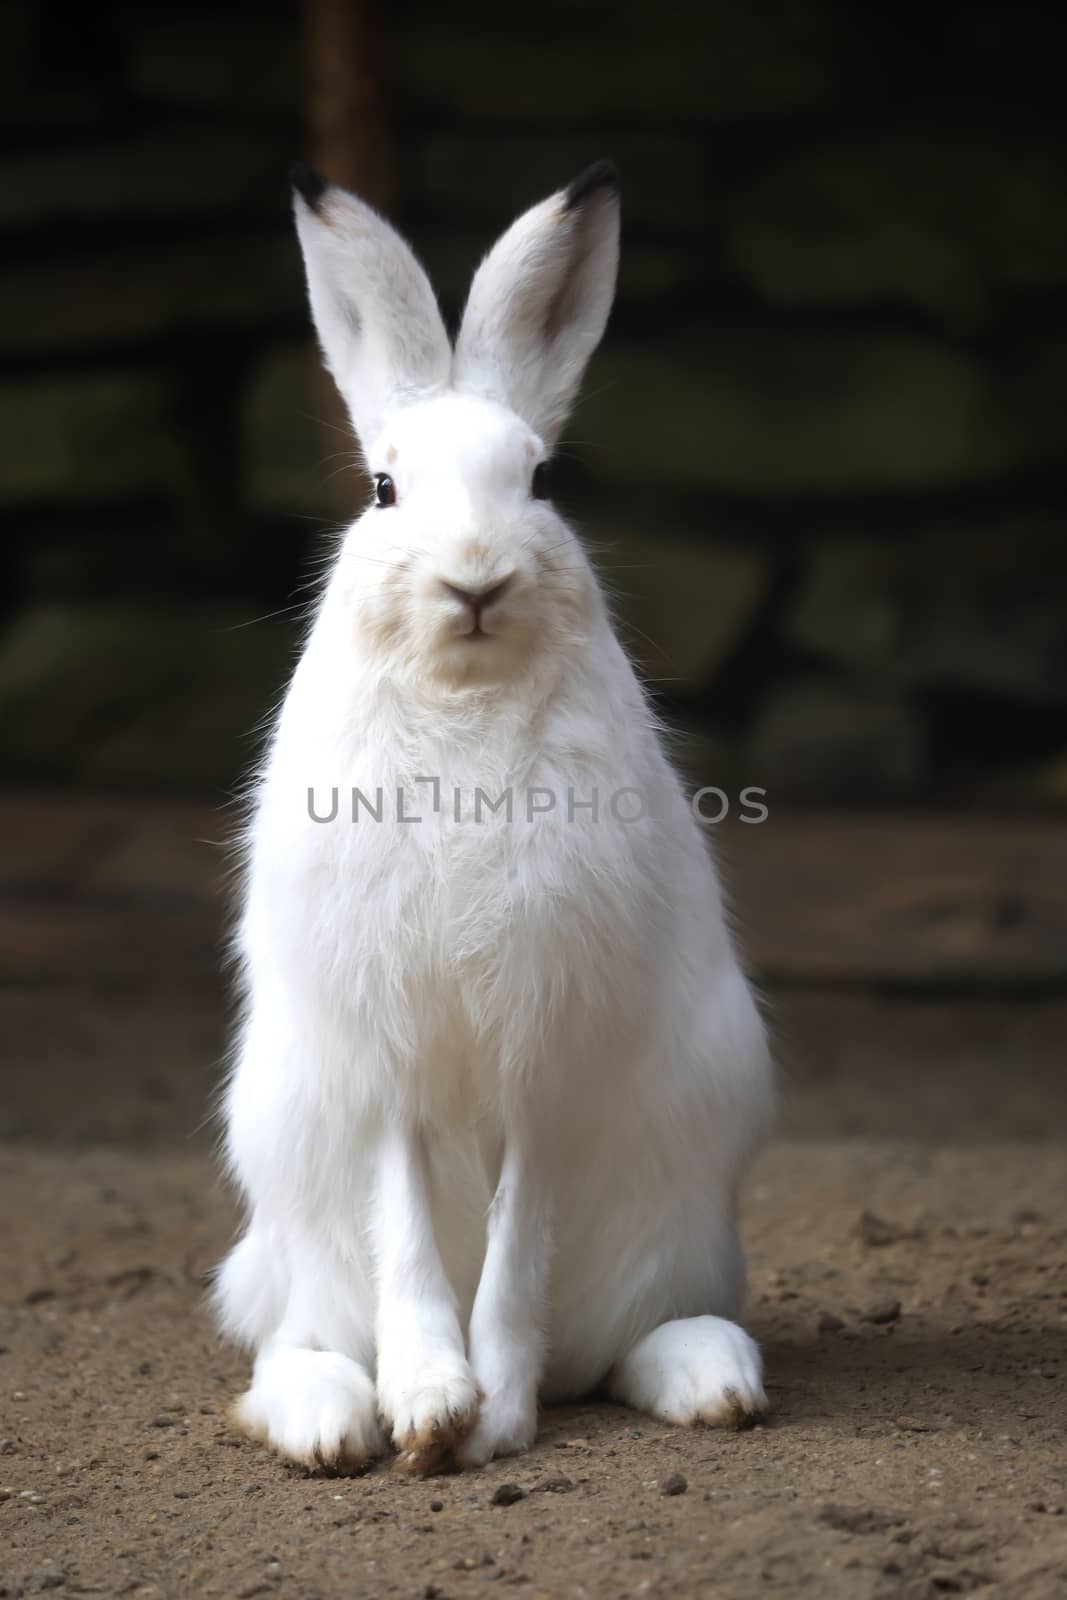 A white rabbit looks into the camera